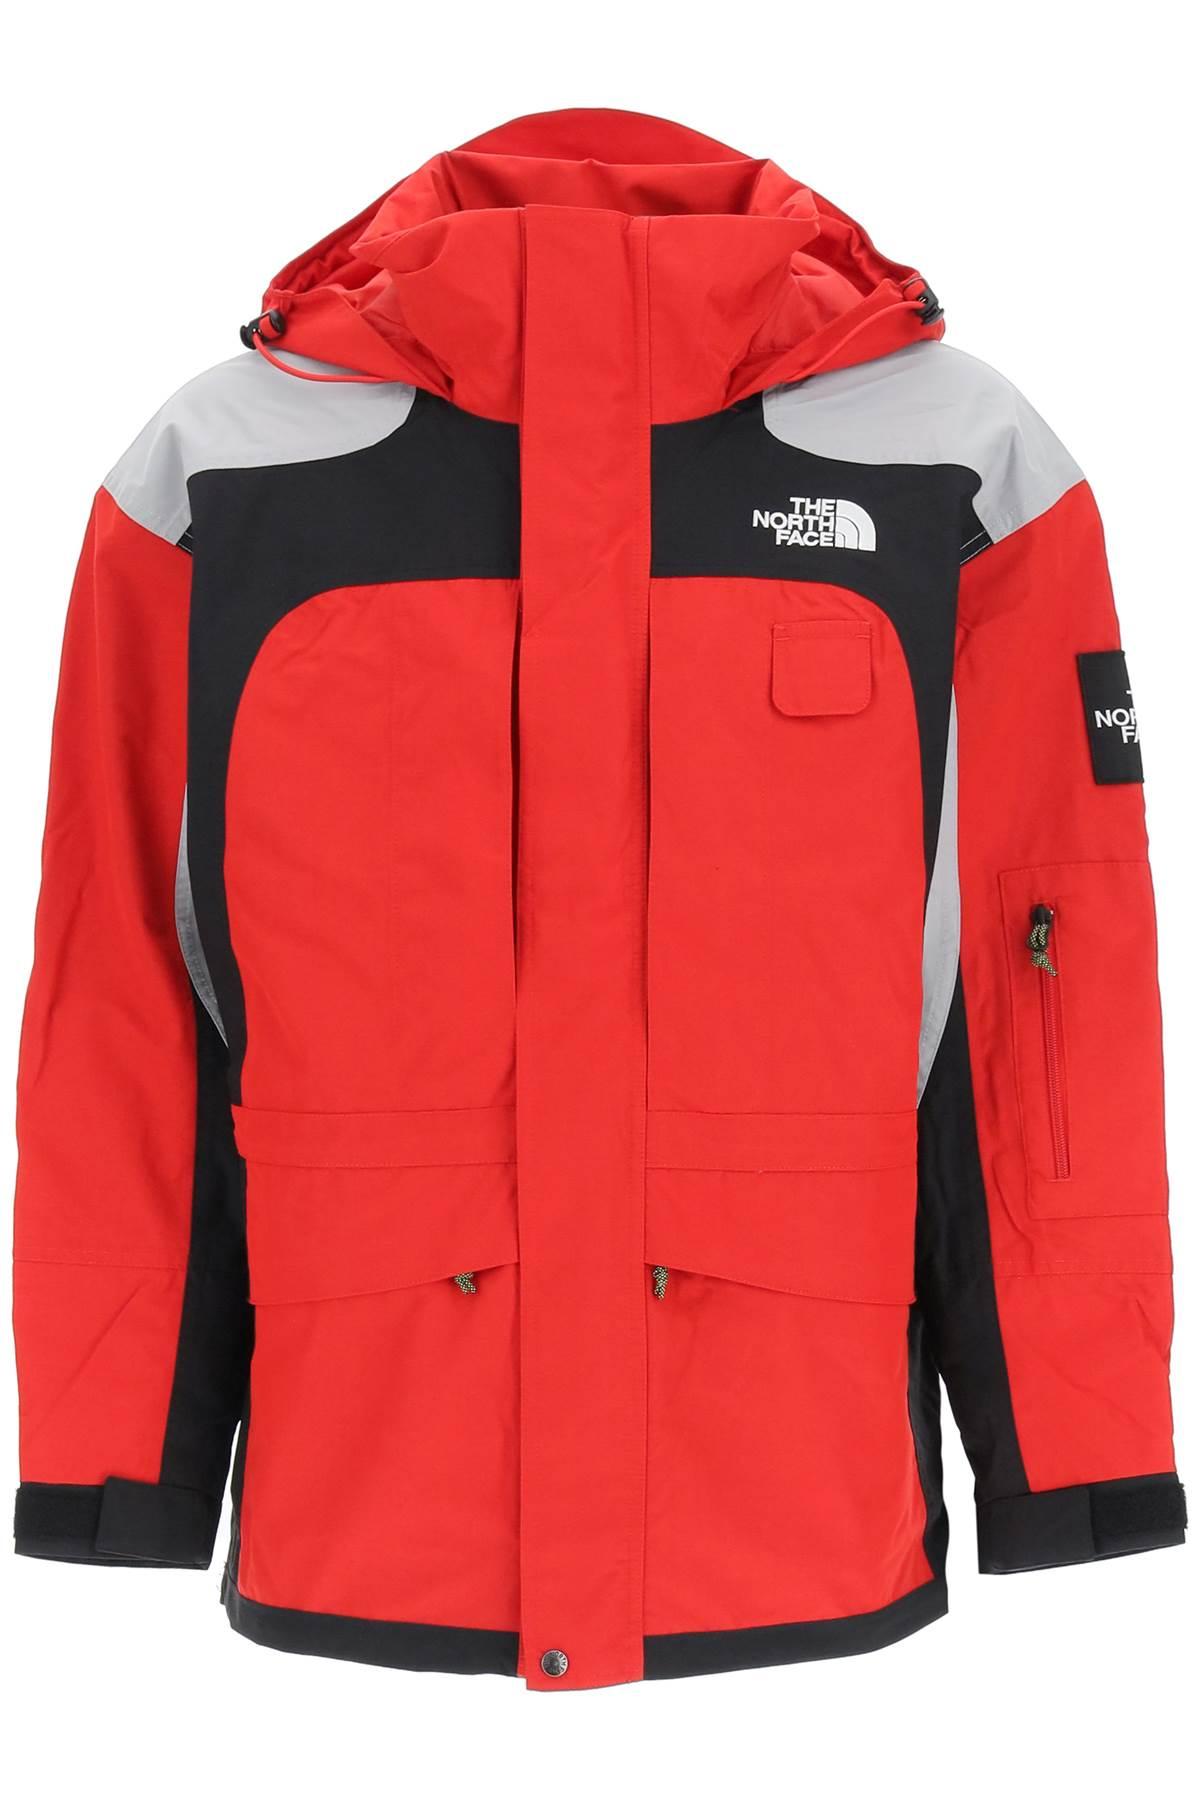 Search & Rescue Dryvent Jacket